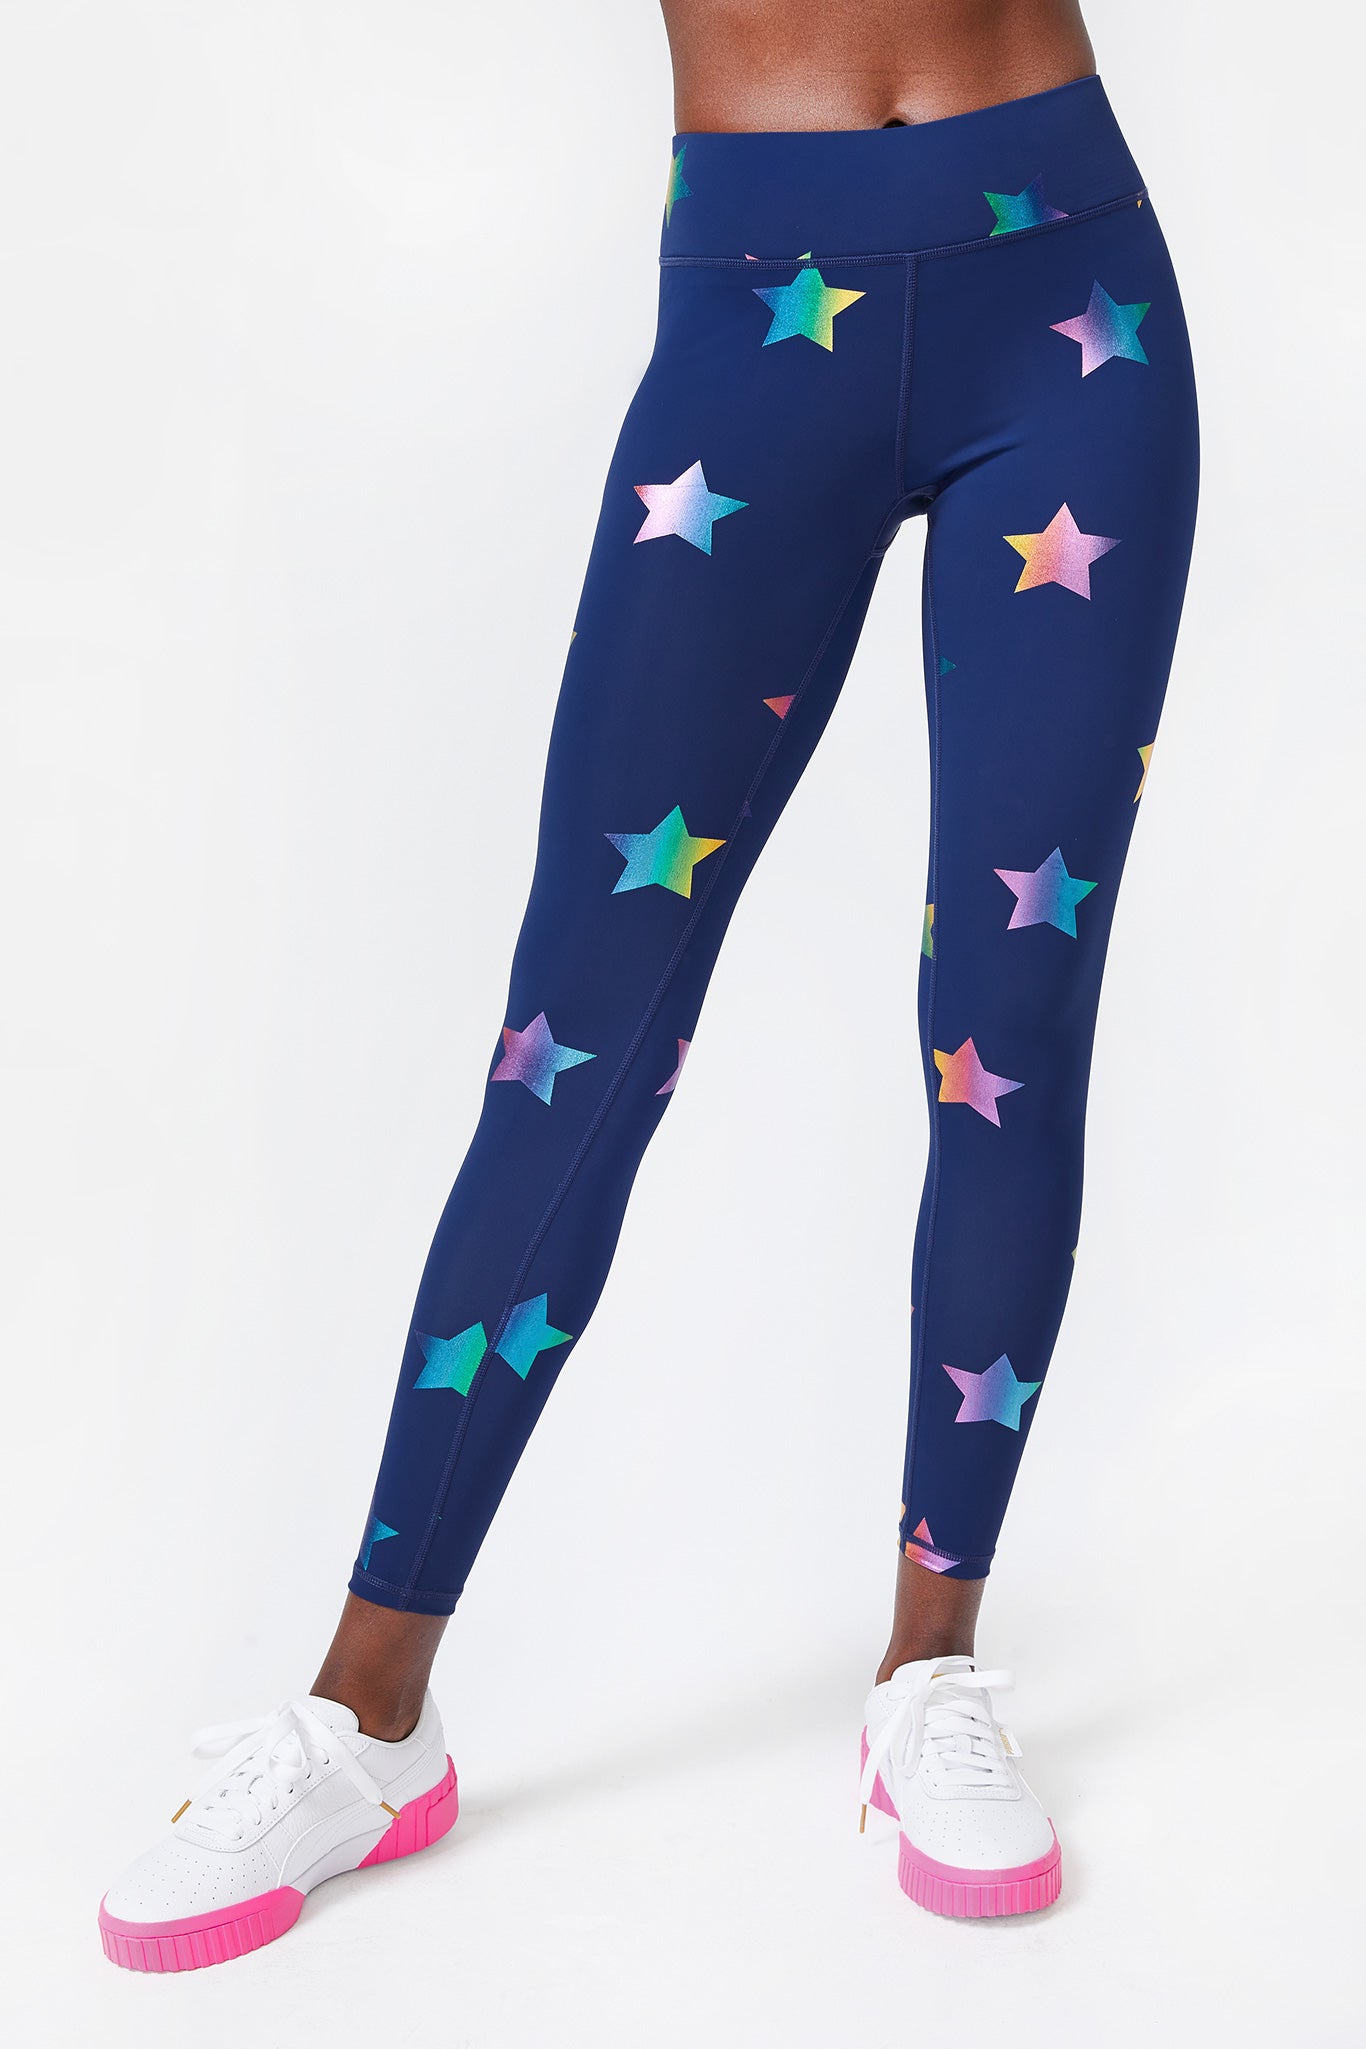 UpLift Leggings in Navy Rainbow Star Foil with Tall Band –